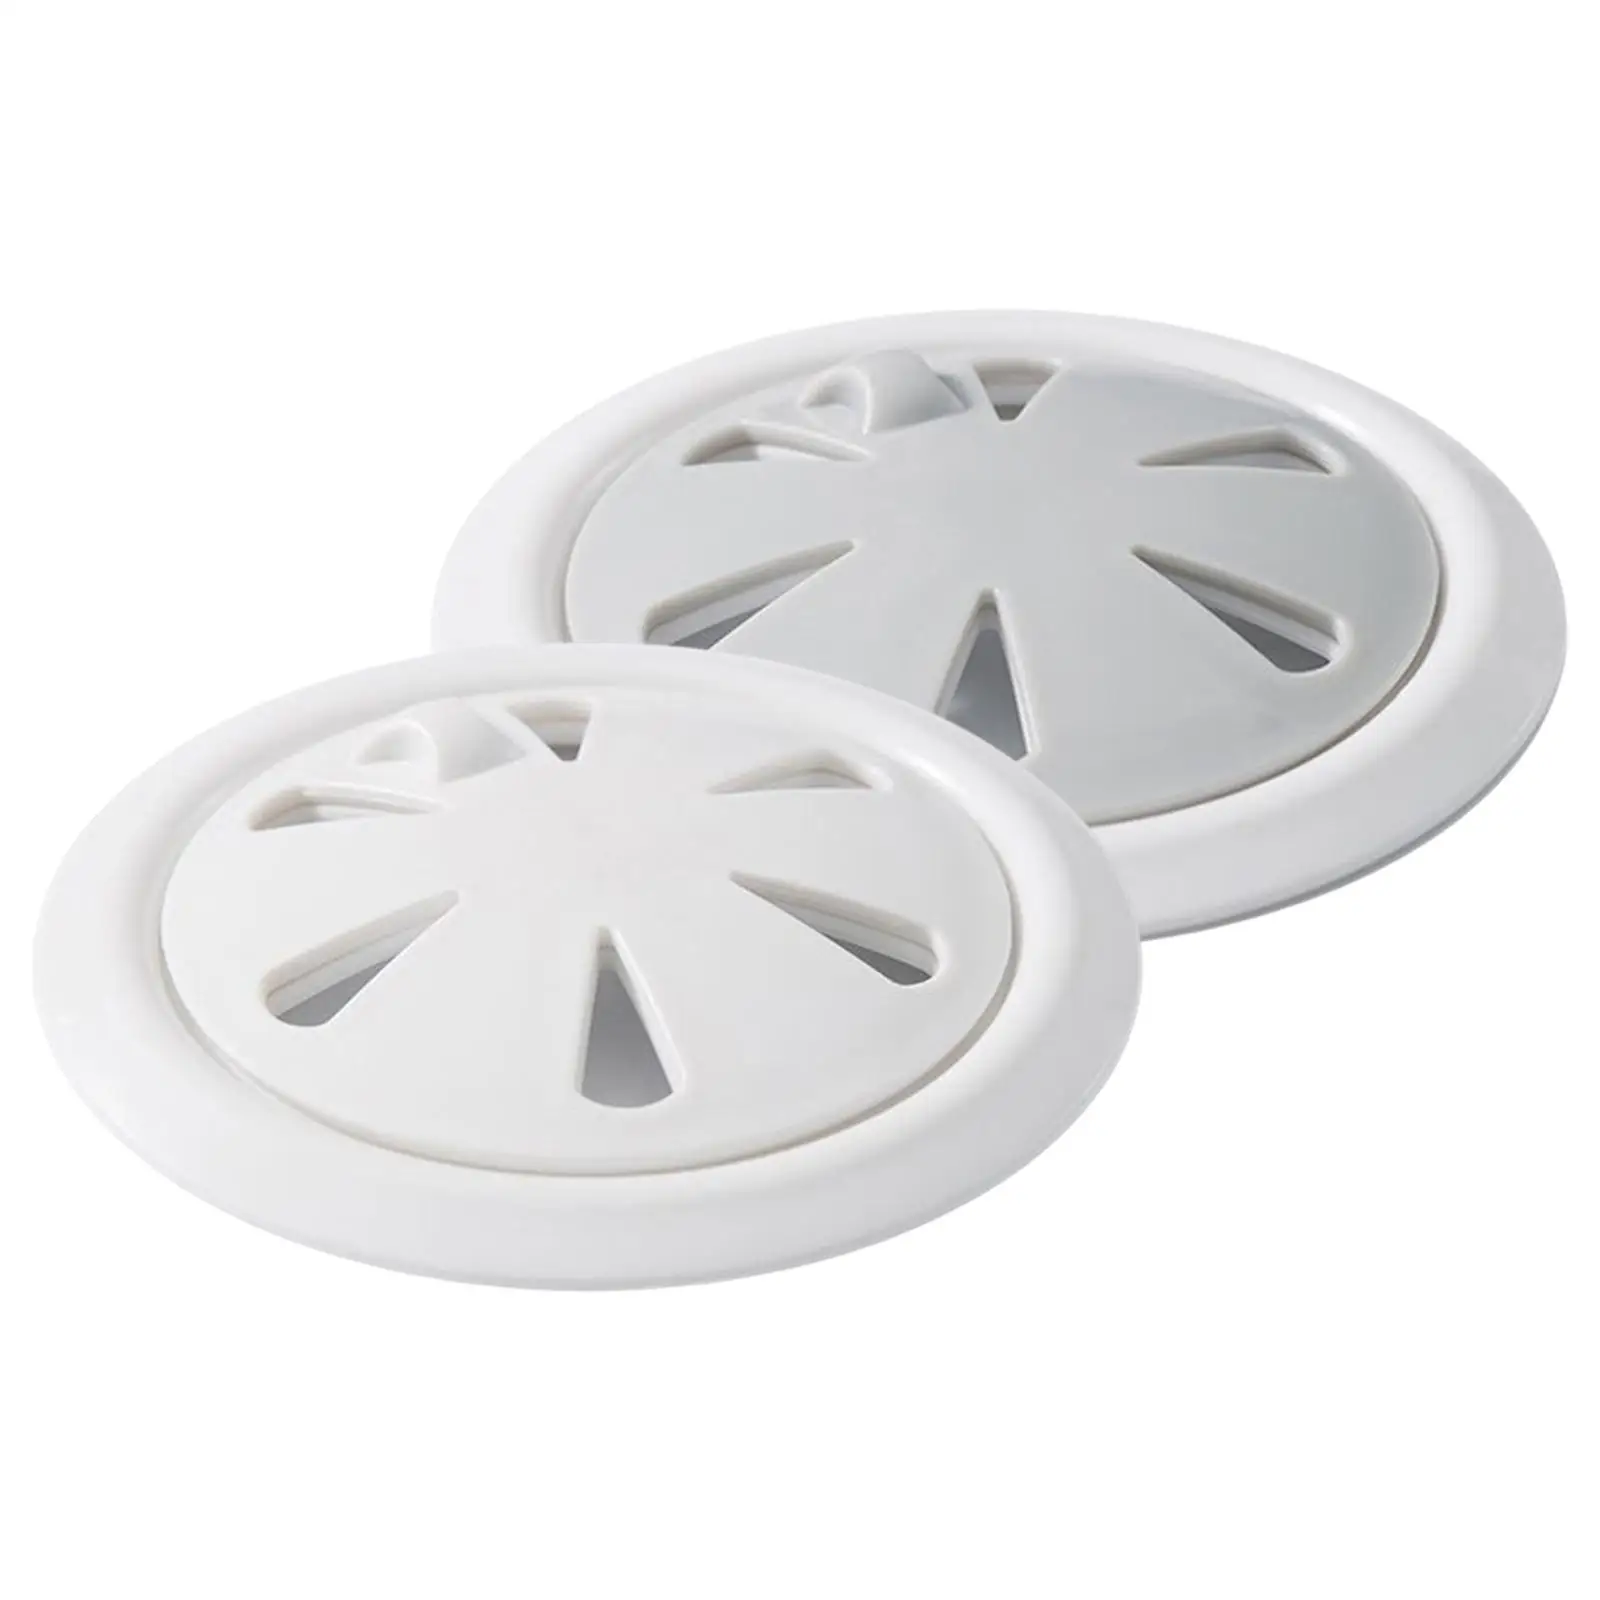 Durable Drain Catcher PP Round Shower Easy to Install and Clean Drain Covers Strainer Stopper Filter for Bathtub